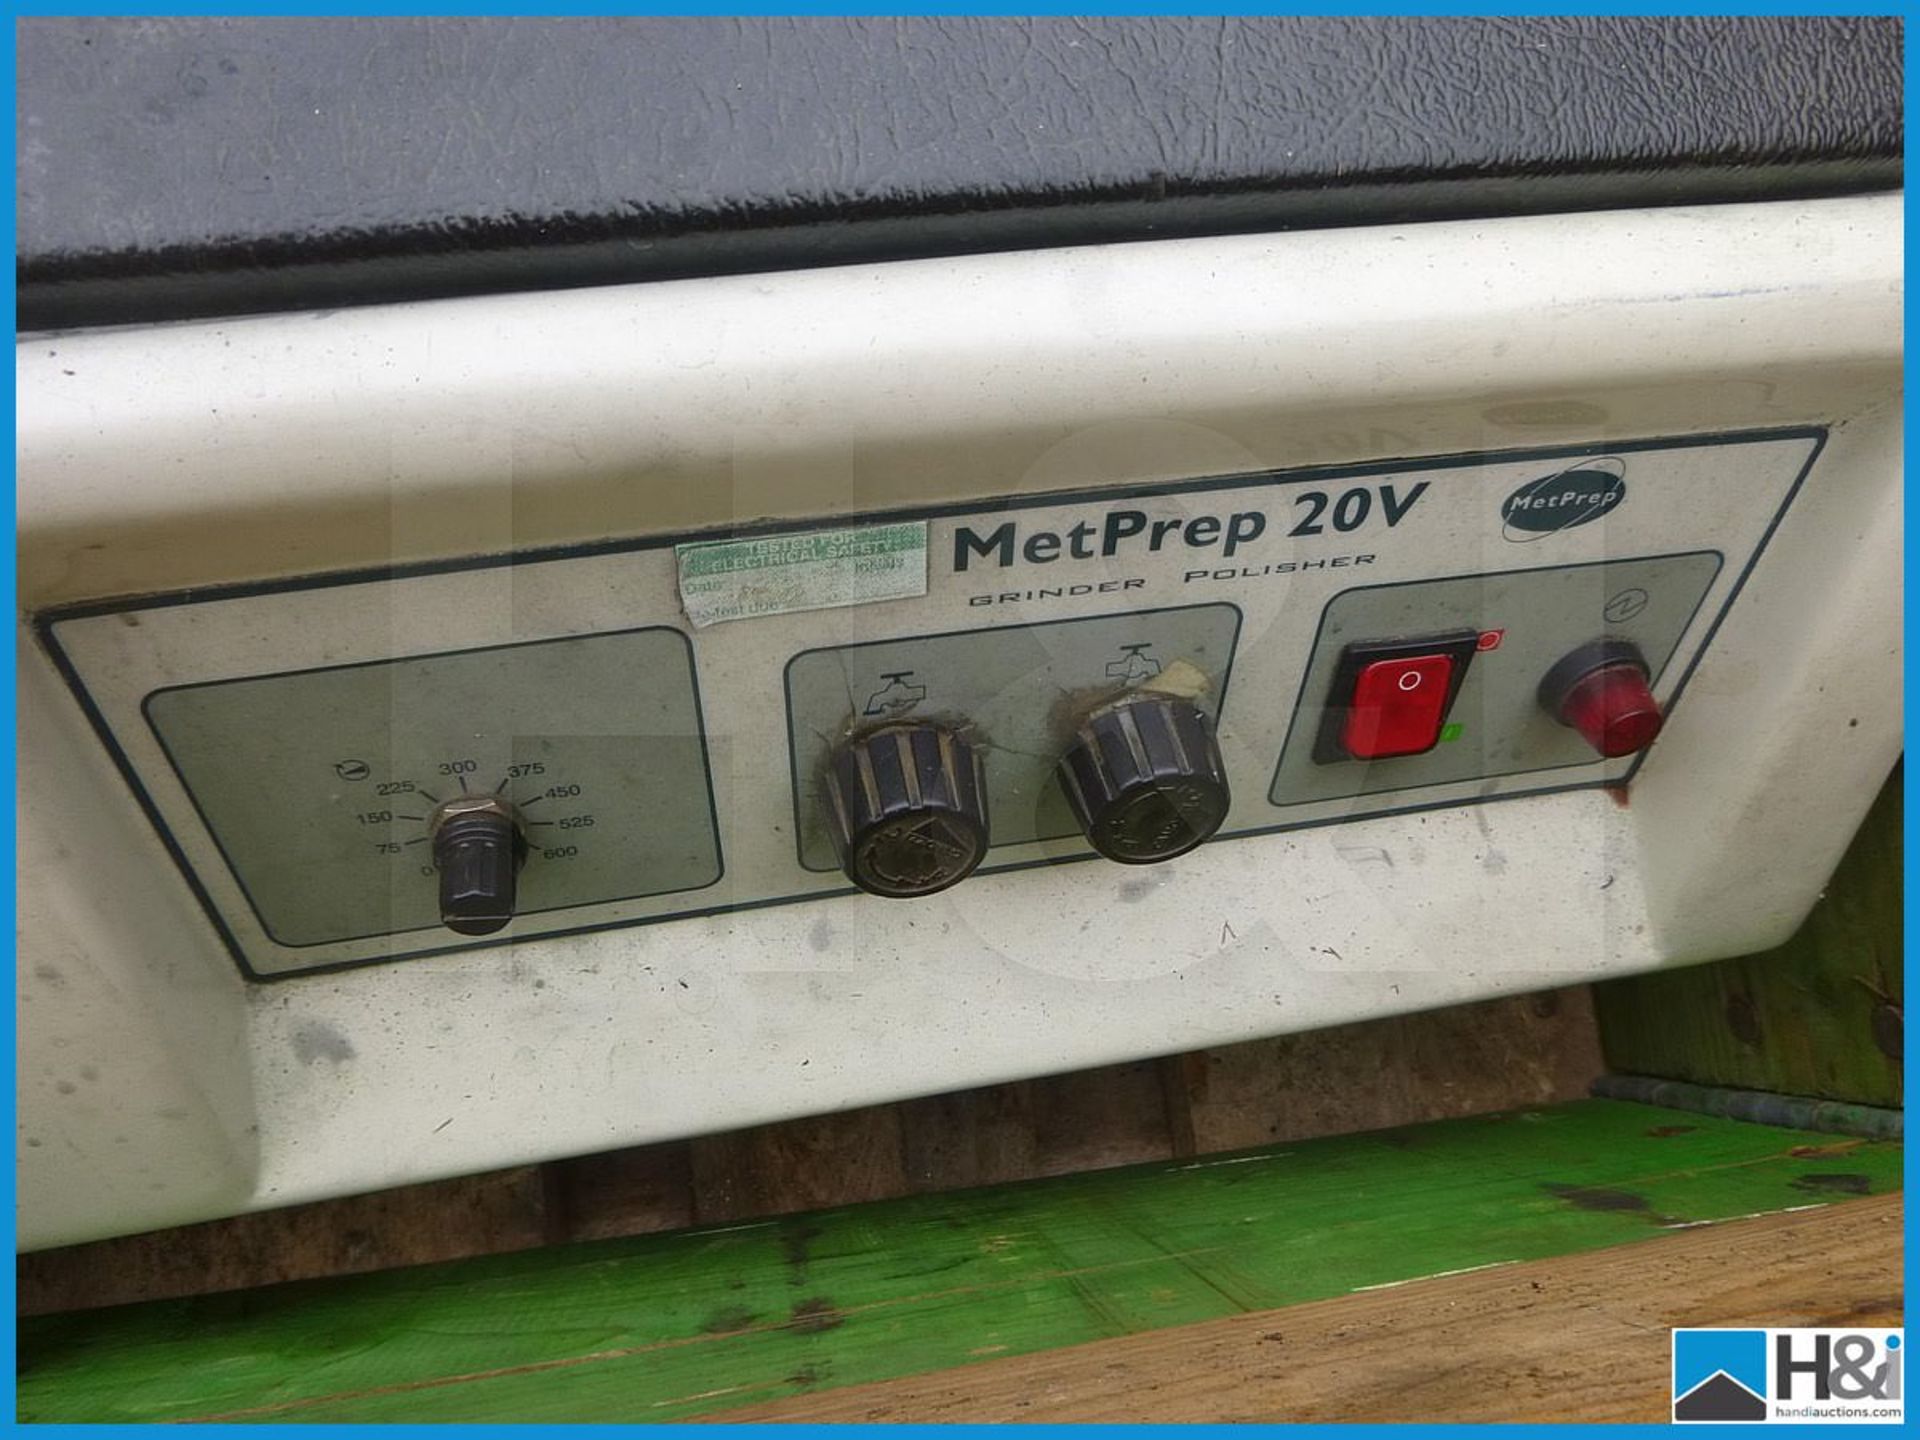 METREP 20V GRINDER POLISHER, USED, NOT CHECKED Appraisal: Viewing Essential Serial No: NA - Image 2 of 5